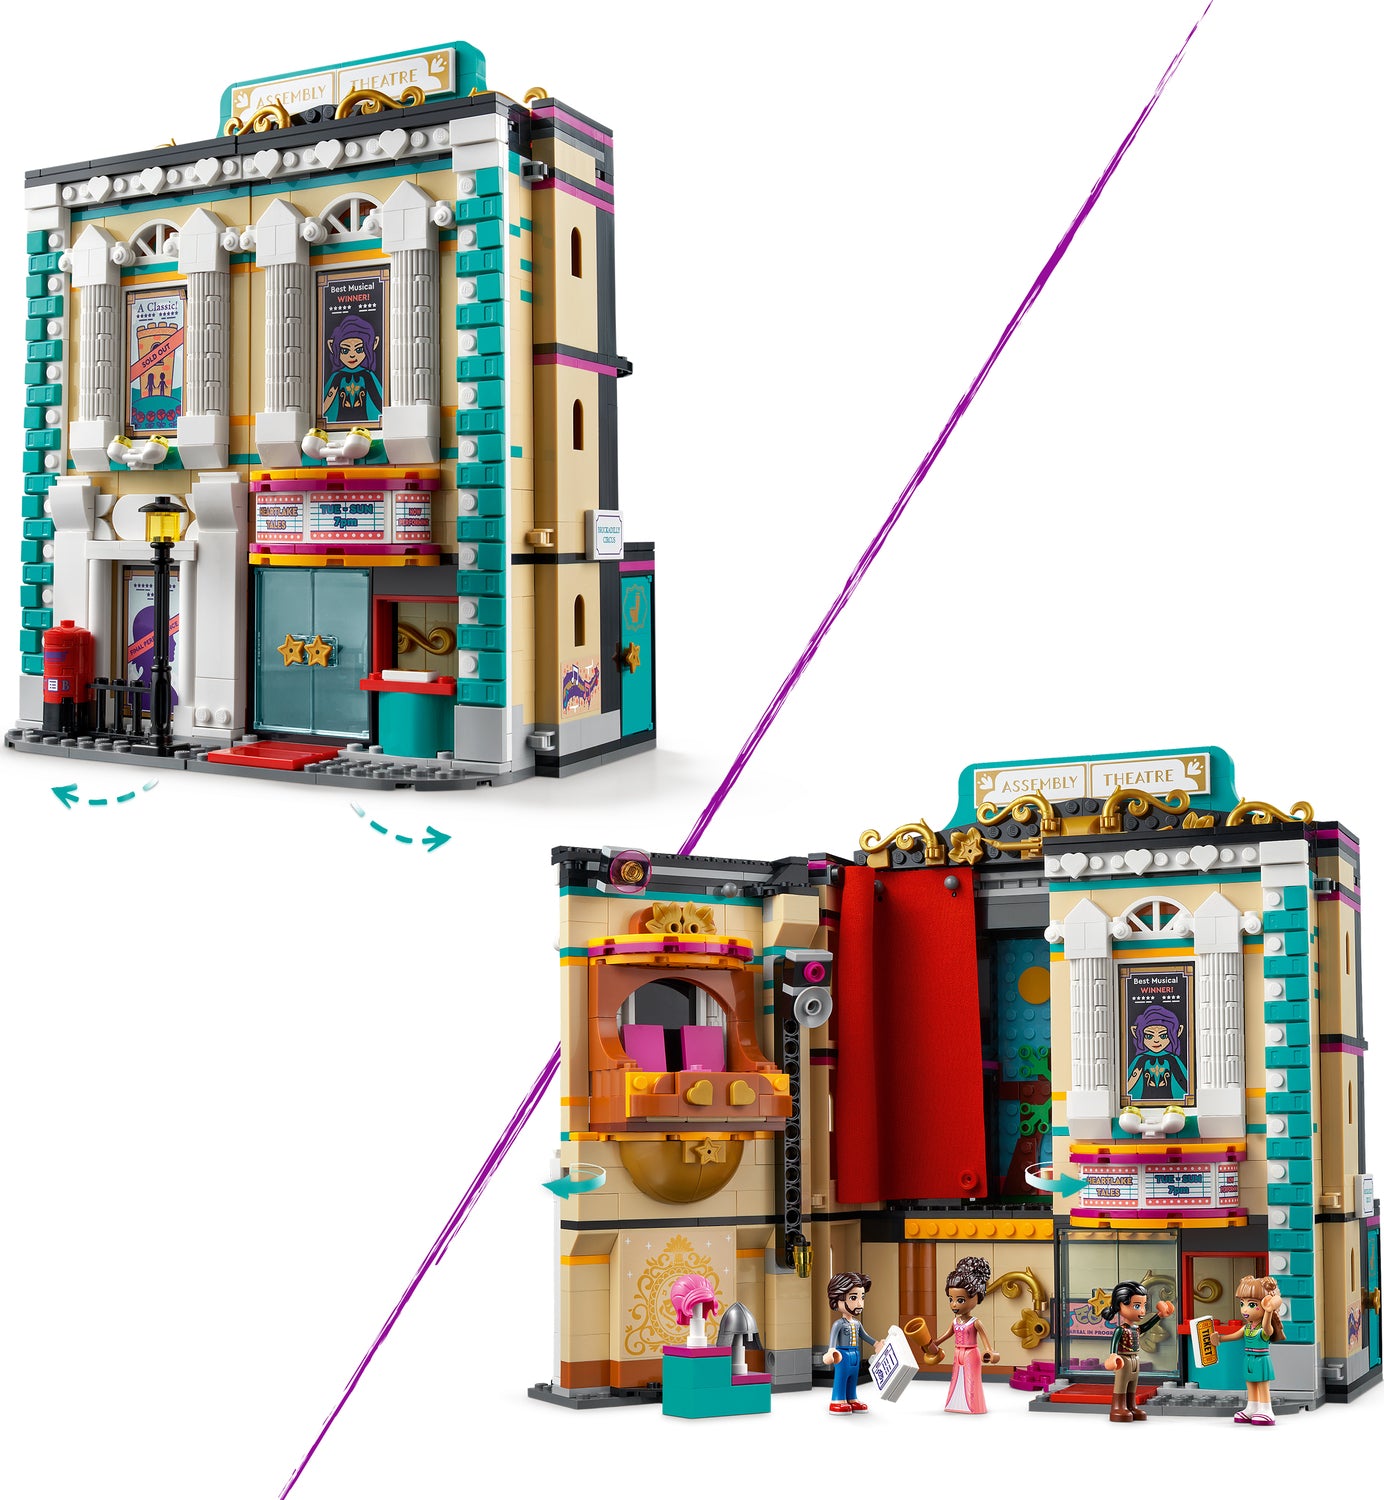 Friends – 41714 LEGO Turner School Theater Toys Andreas